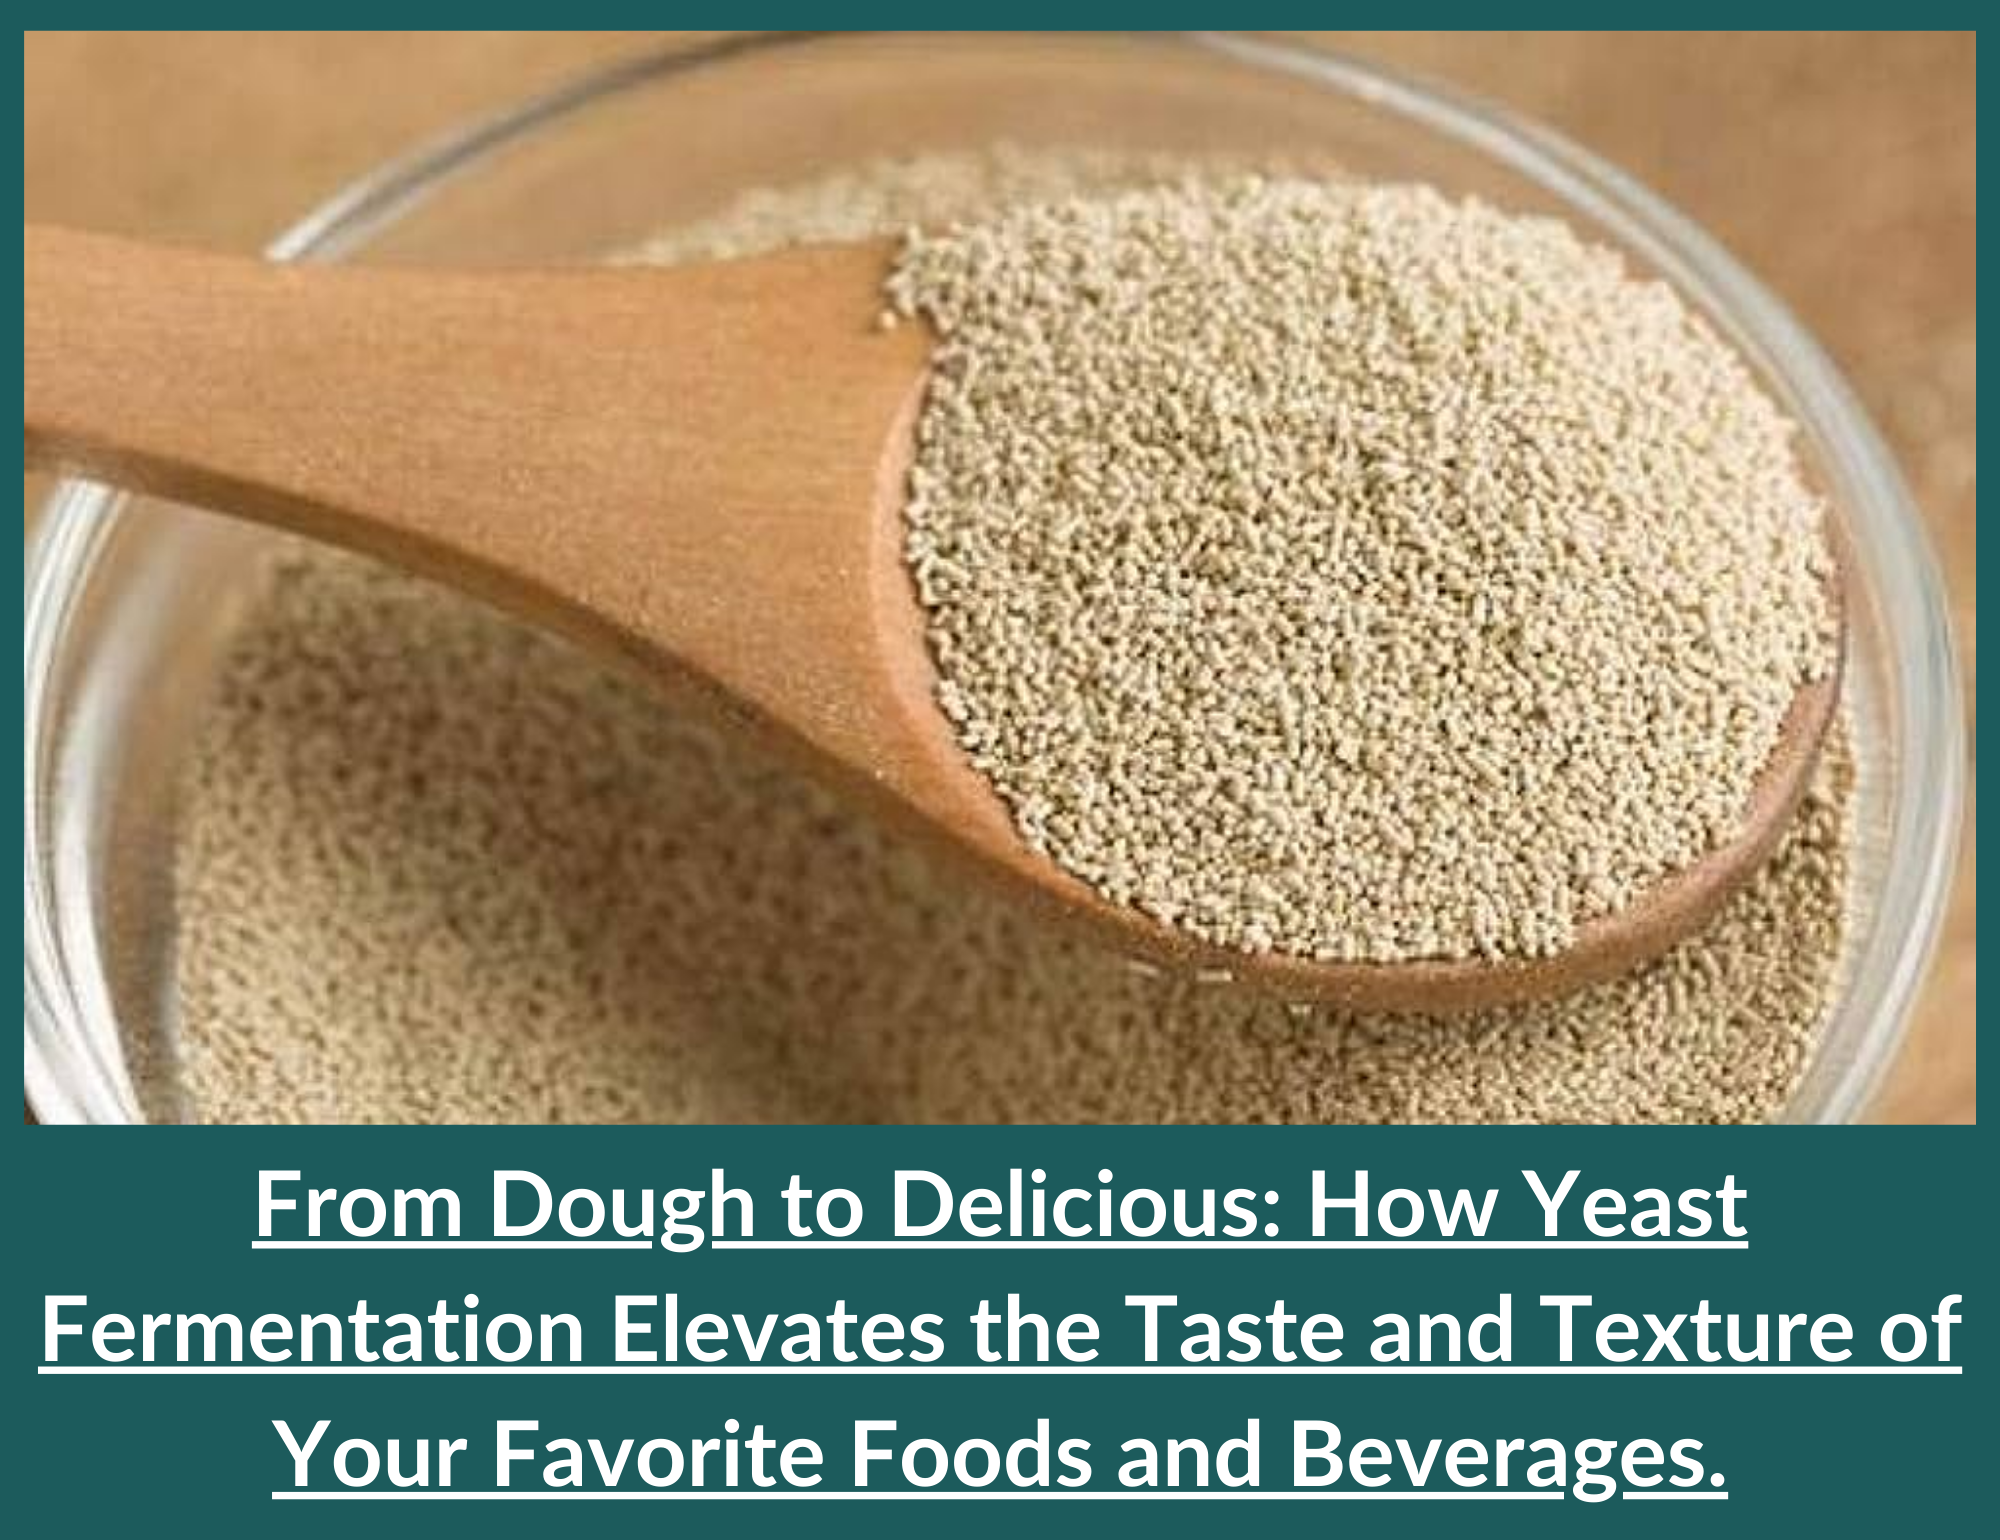 Yeast Fermentation effects of foods & beverages